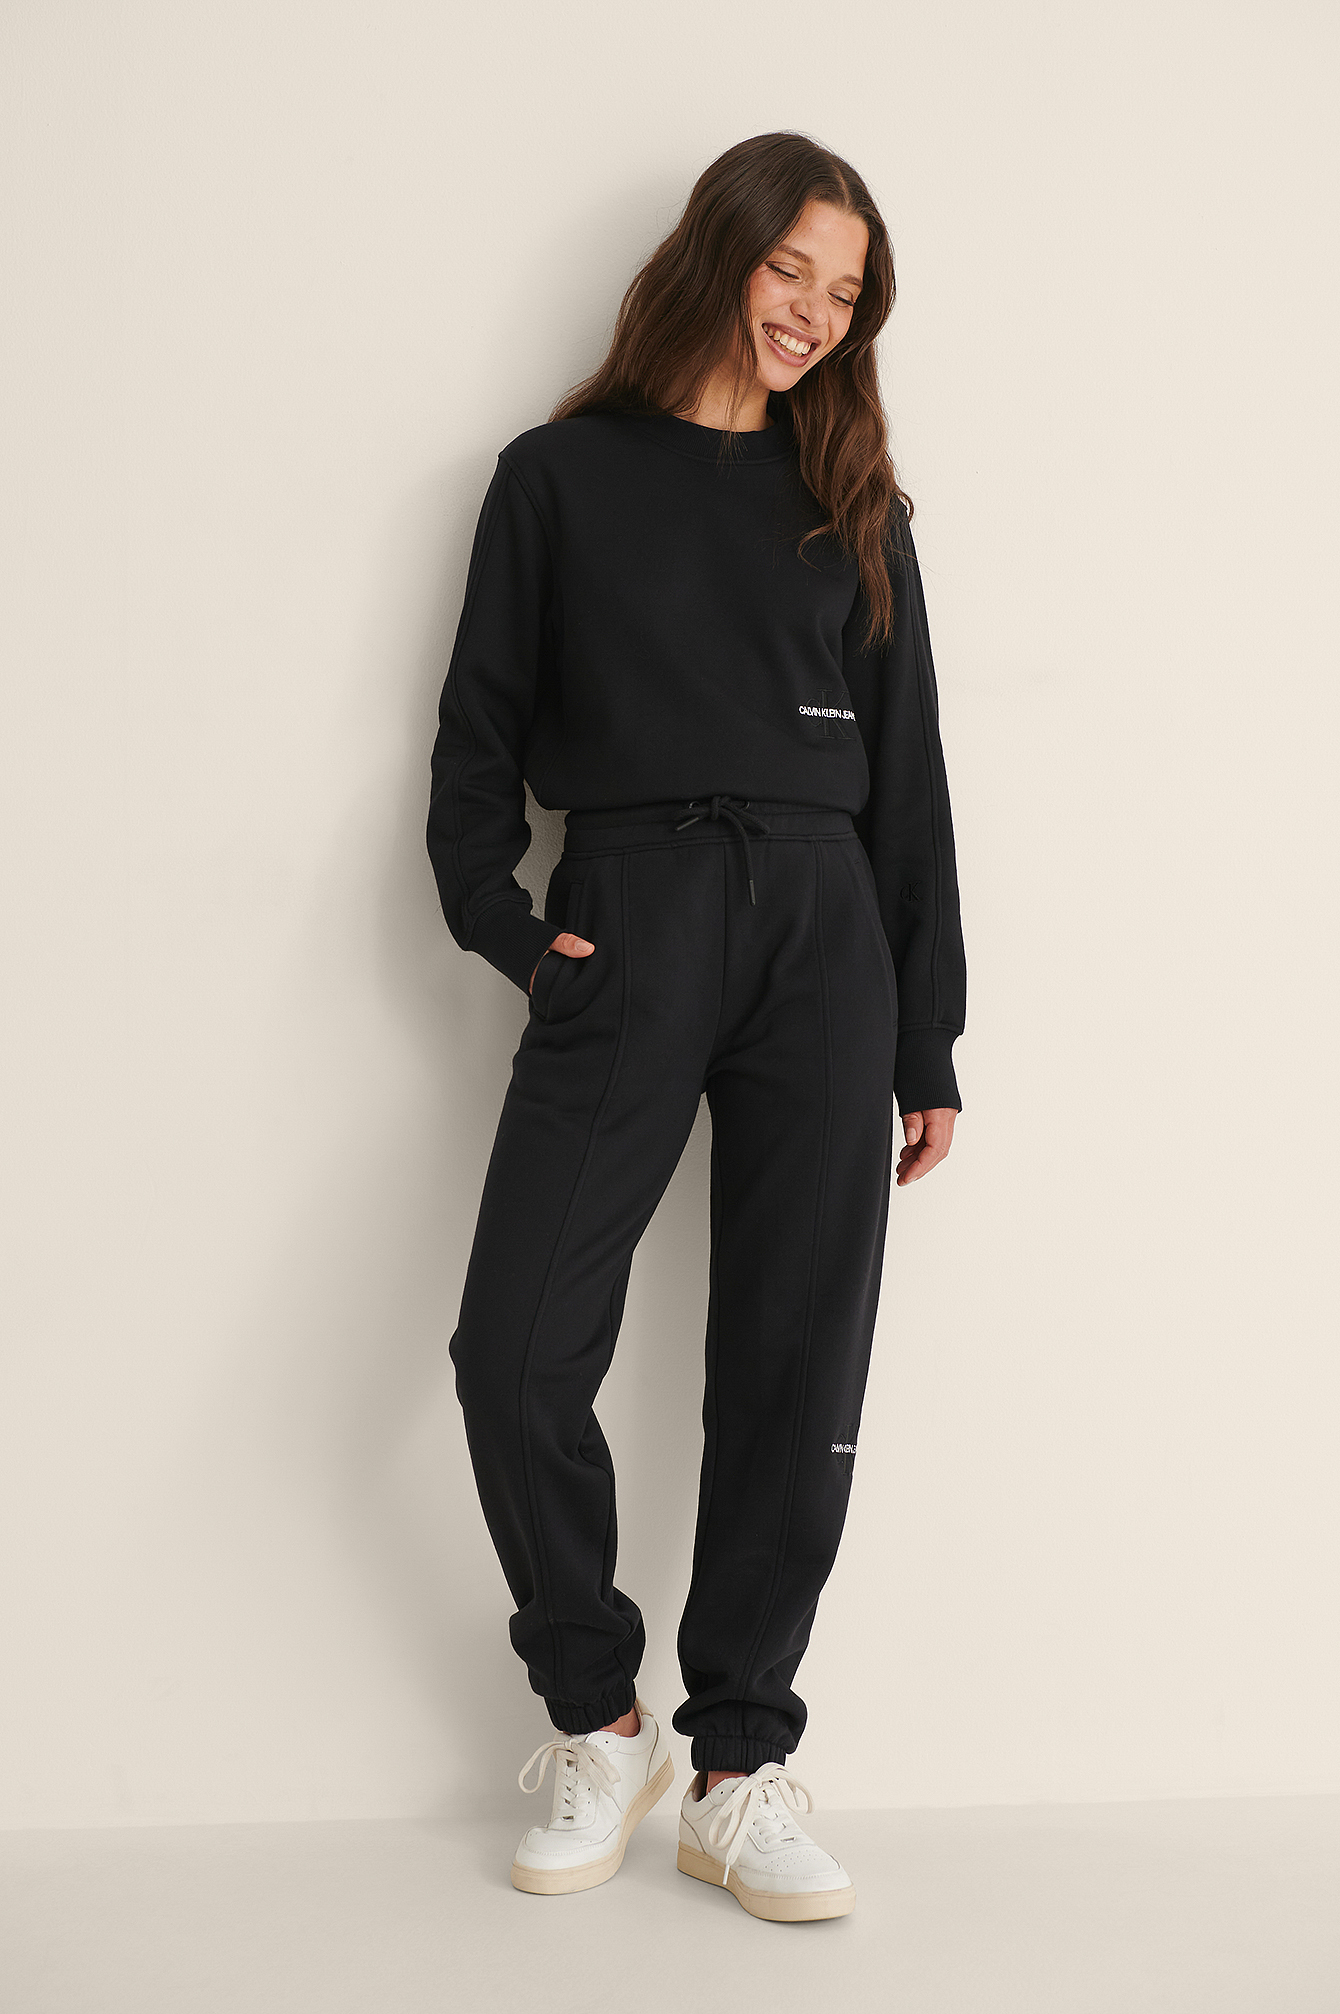 Off Placed Monogram Jogging Pants Outfit